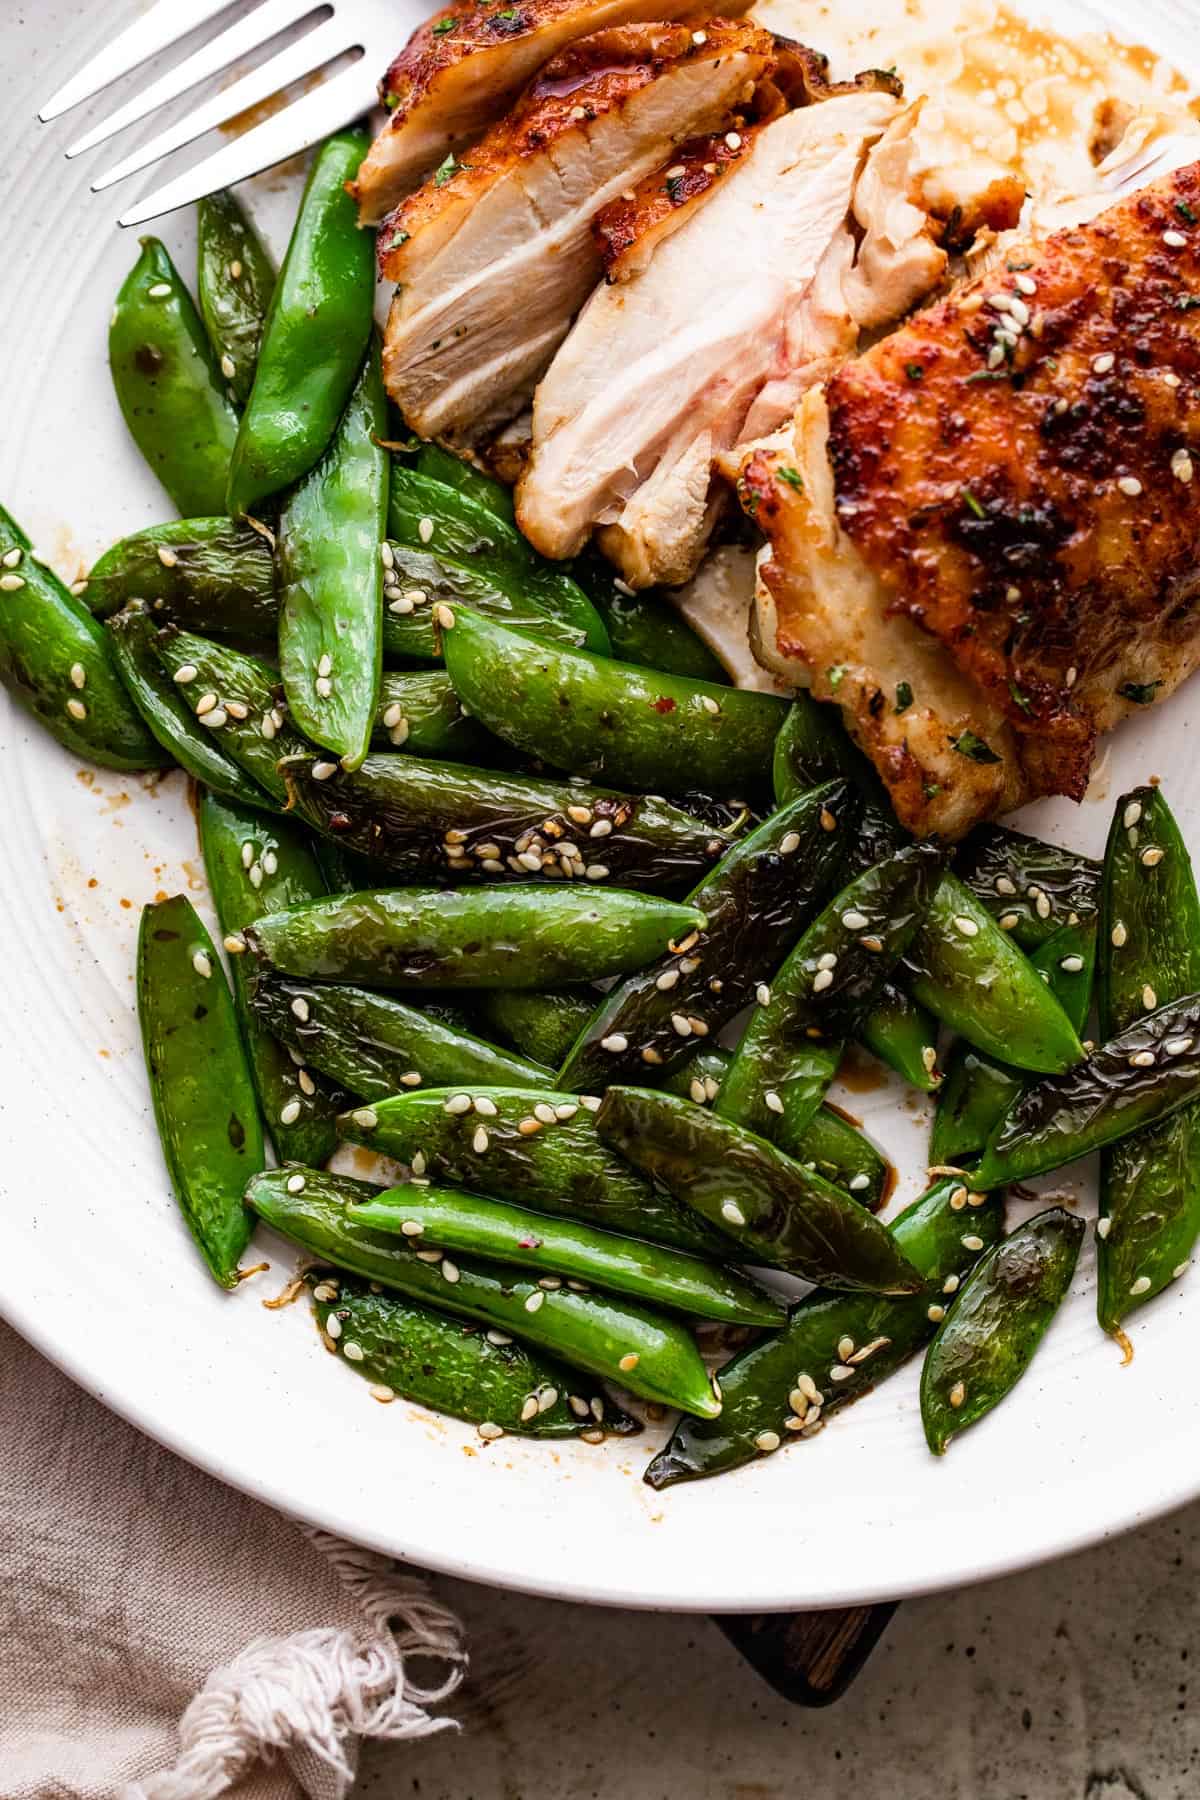 cooked sugar snap peas arranged on a dinner plate with chicken thighs placed next to them.